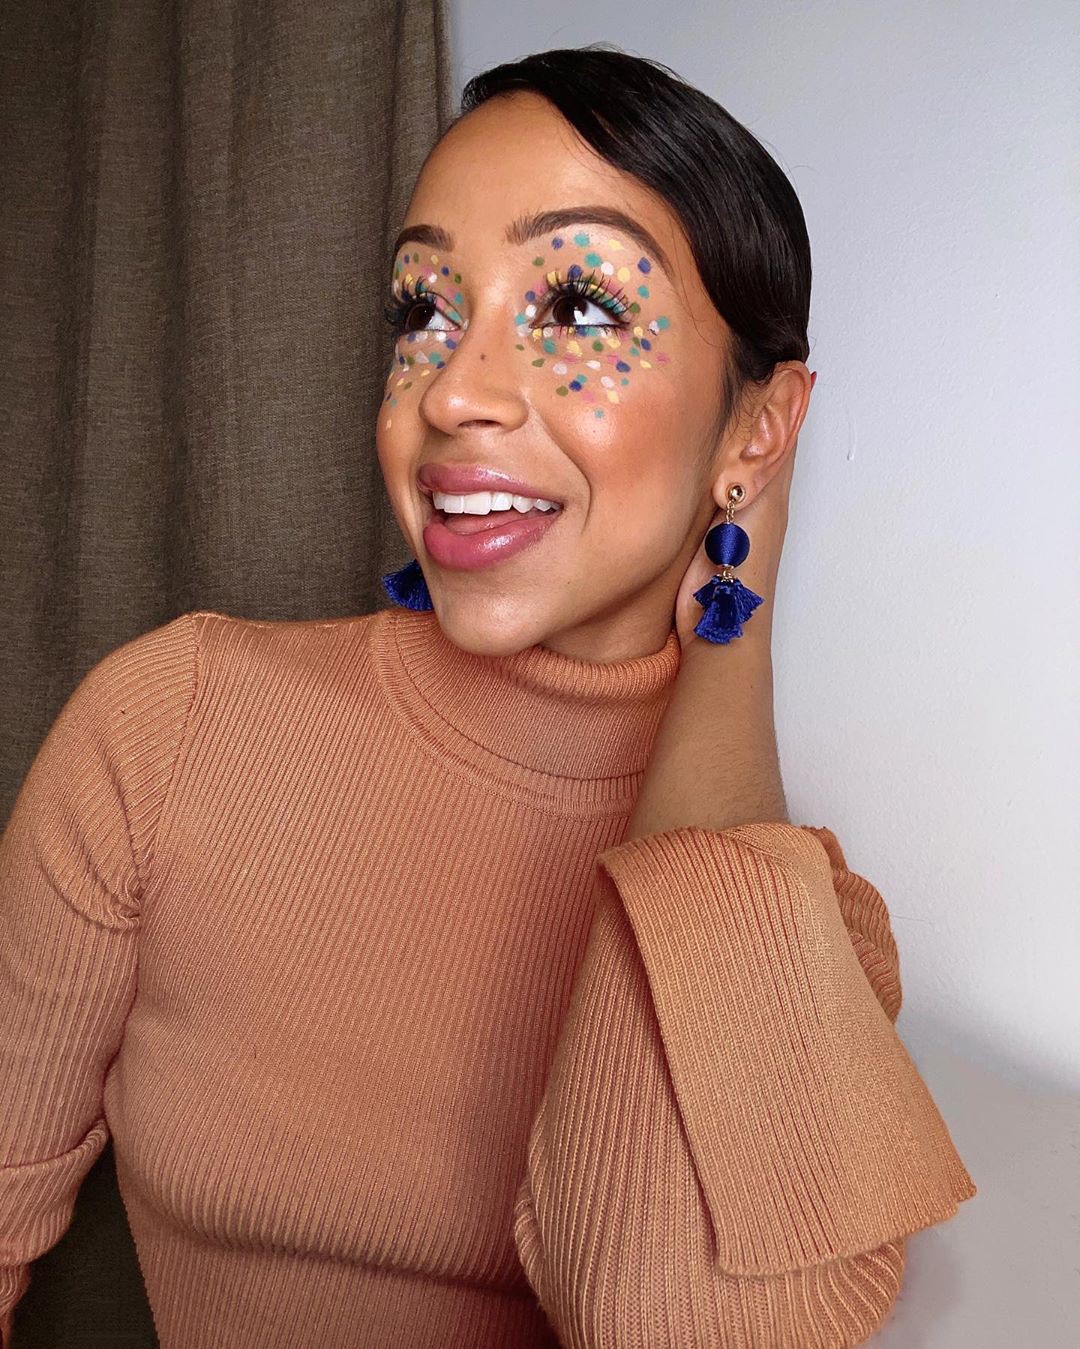 Liza Koshy Cute Face, Lips Smile, Hairstyle For Girls: Liza Koshy,  Cute Girls Instagram,  Cute Instagram Girls  